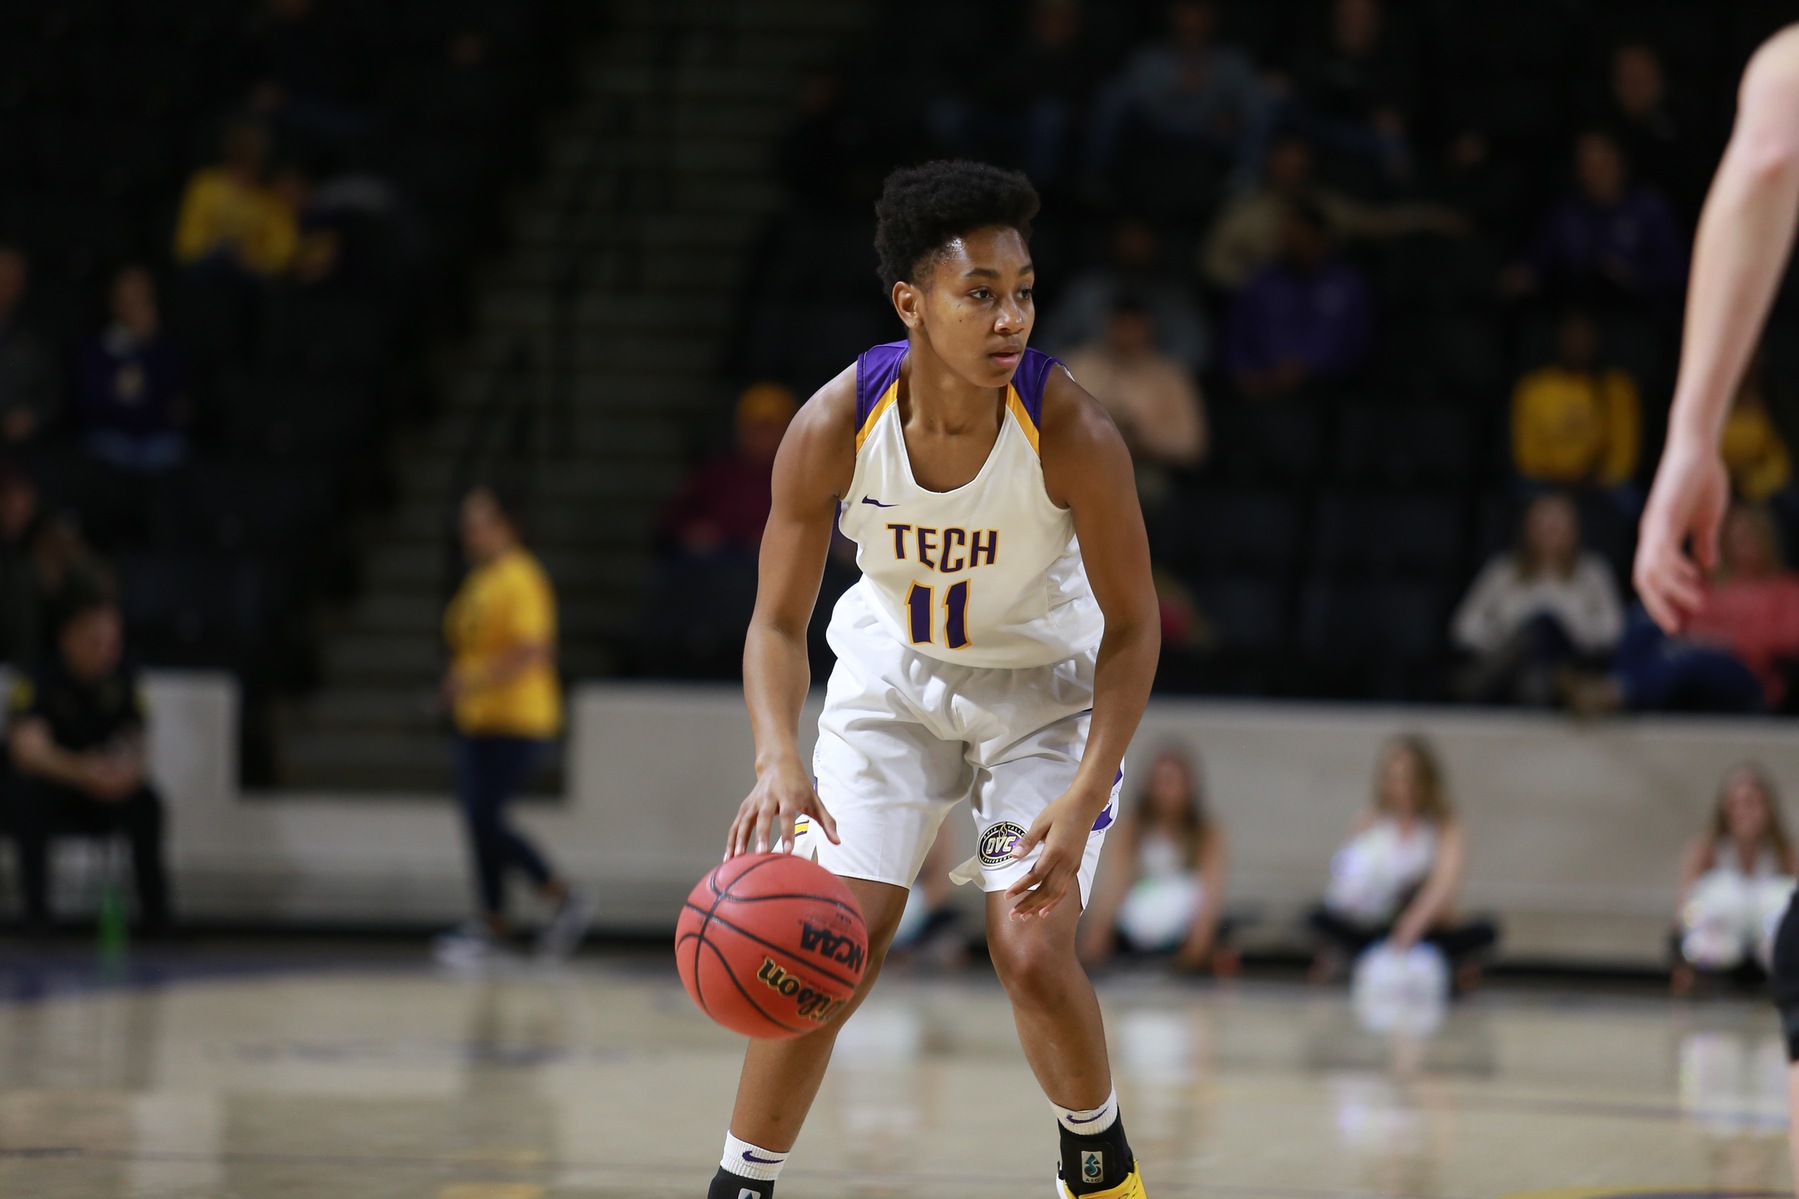 Tech ends road swing at Jacksonville State; hosts Belmont